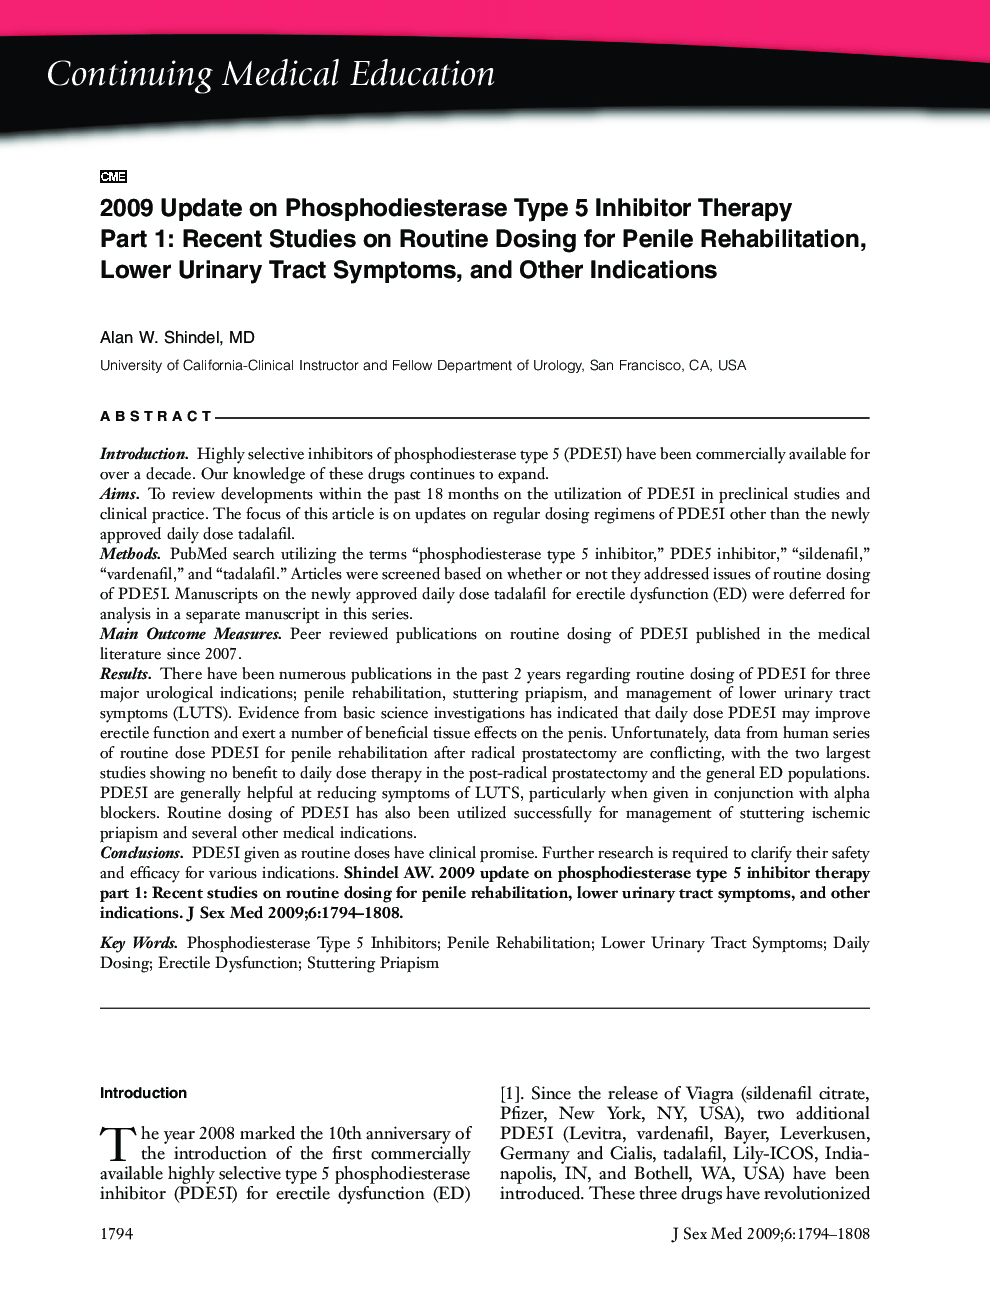 Continuing Medical Education: 2009 Update on Phosphodiesterase Type 5 Inhibitor Therapy Part 1: Recent Studies on Routine Dosing for Penile Rehabilitation, Lower Urinary Tract Symptoms, and Other Indications (CME)